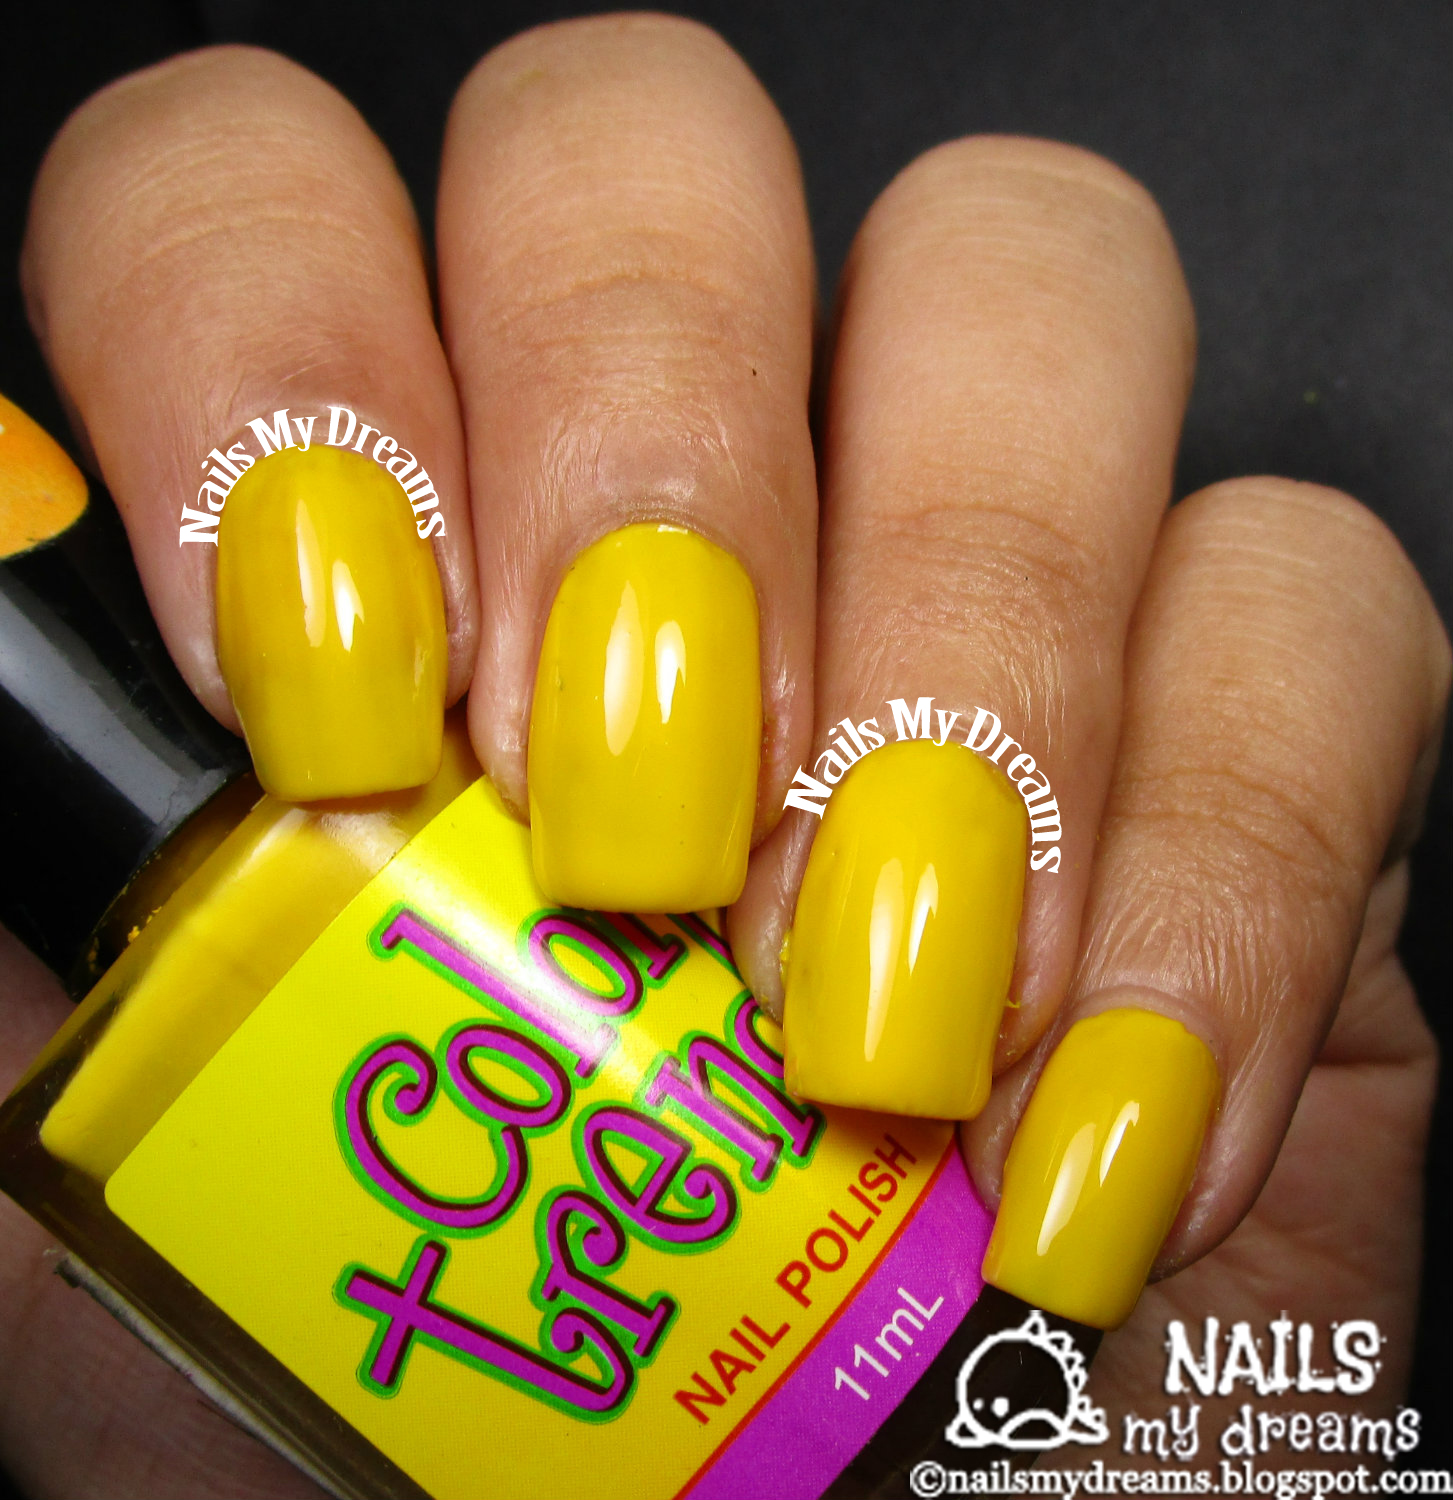 Sunshine Nails: The Trend Brightening Your Next Manicure